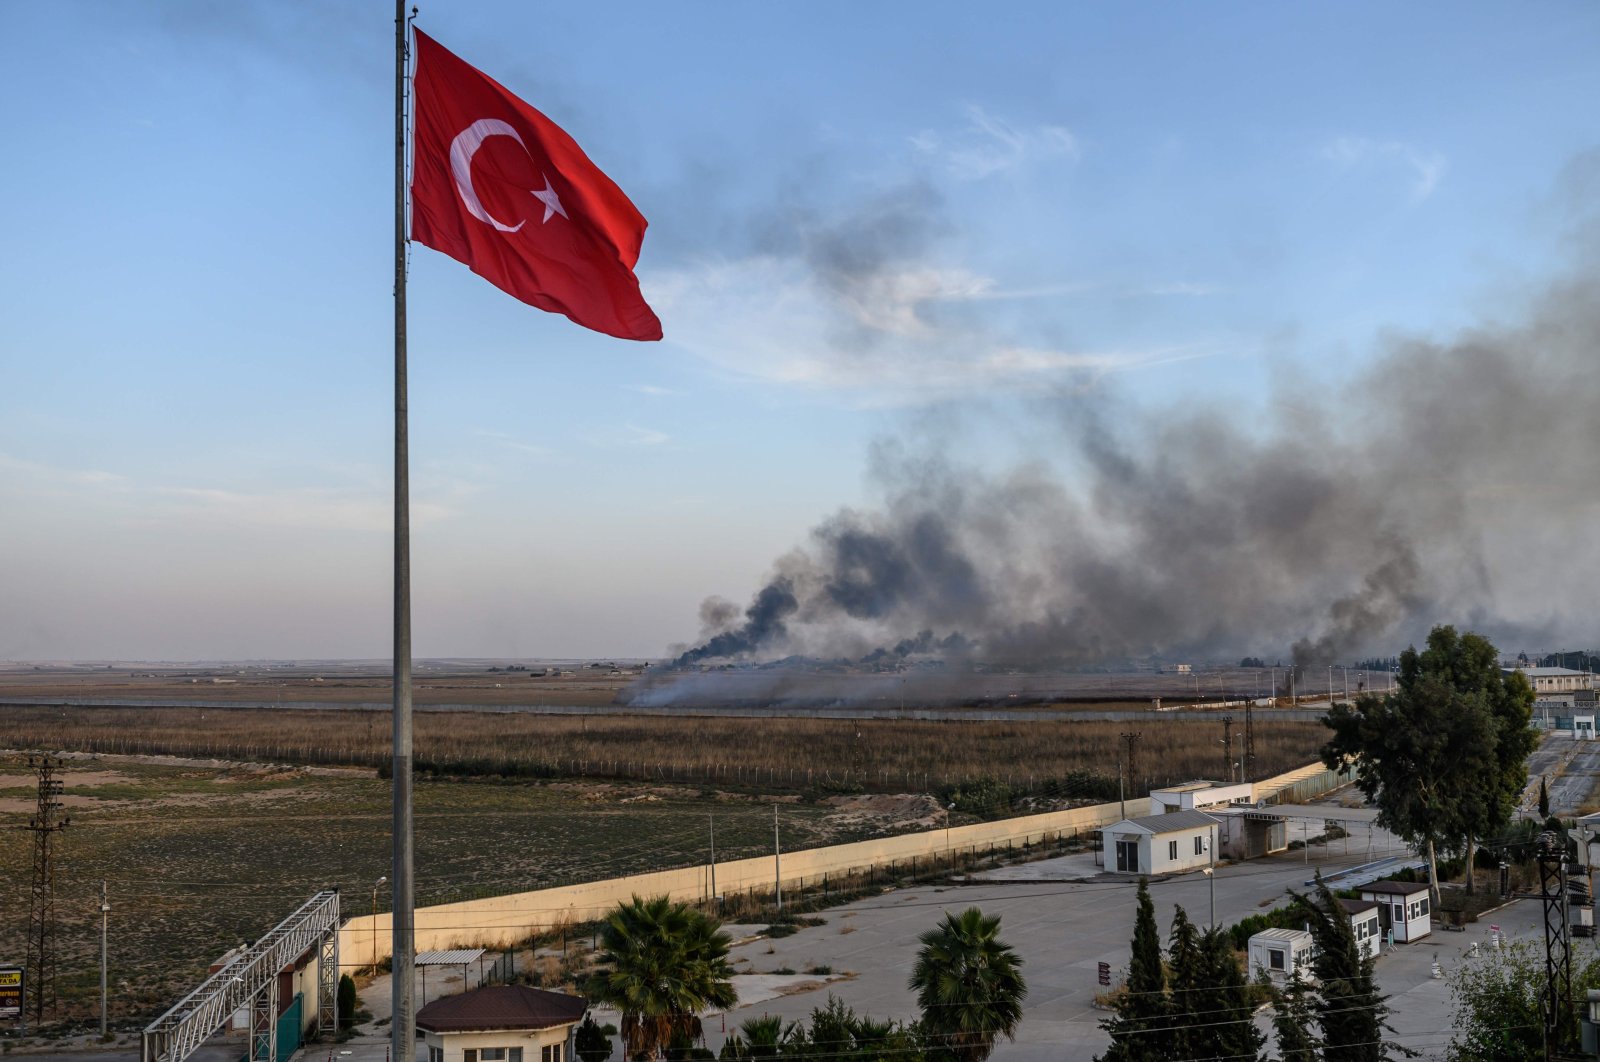 Smoke rises from the Syrian town of Tal Abyad, in a picture taken from the Turkish side of the border where the Turkish flag is seen near Akçakale on Oct. 10, 2019. (AFP File Photo)